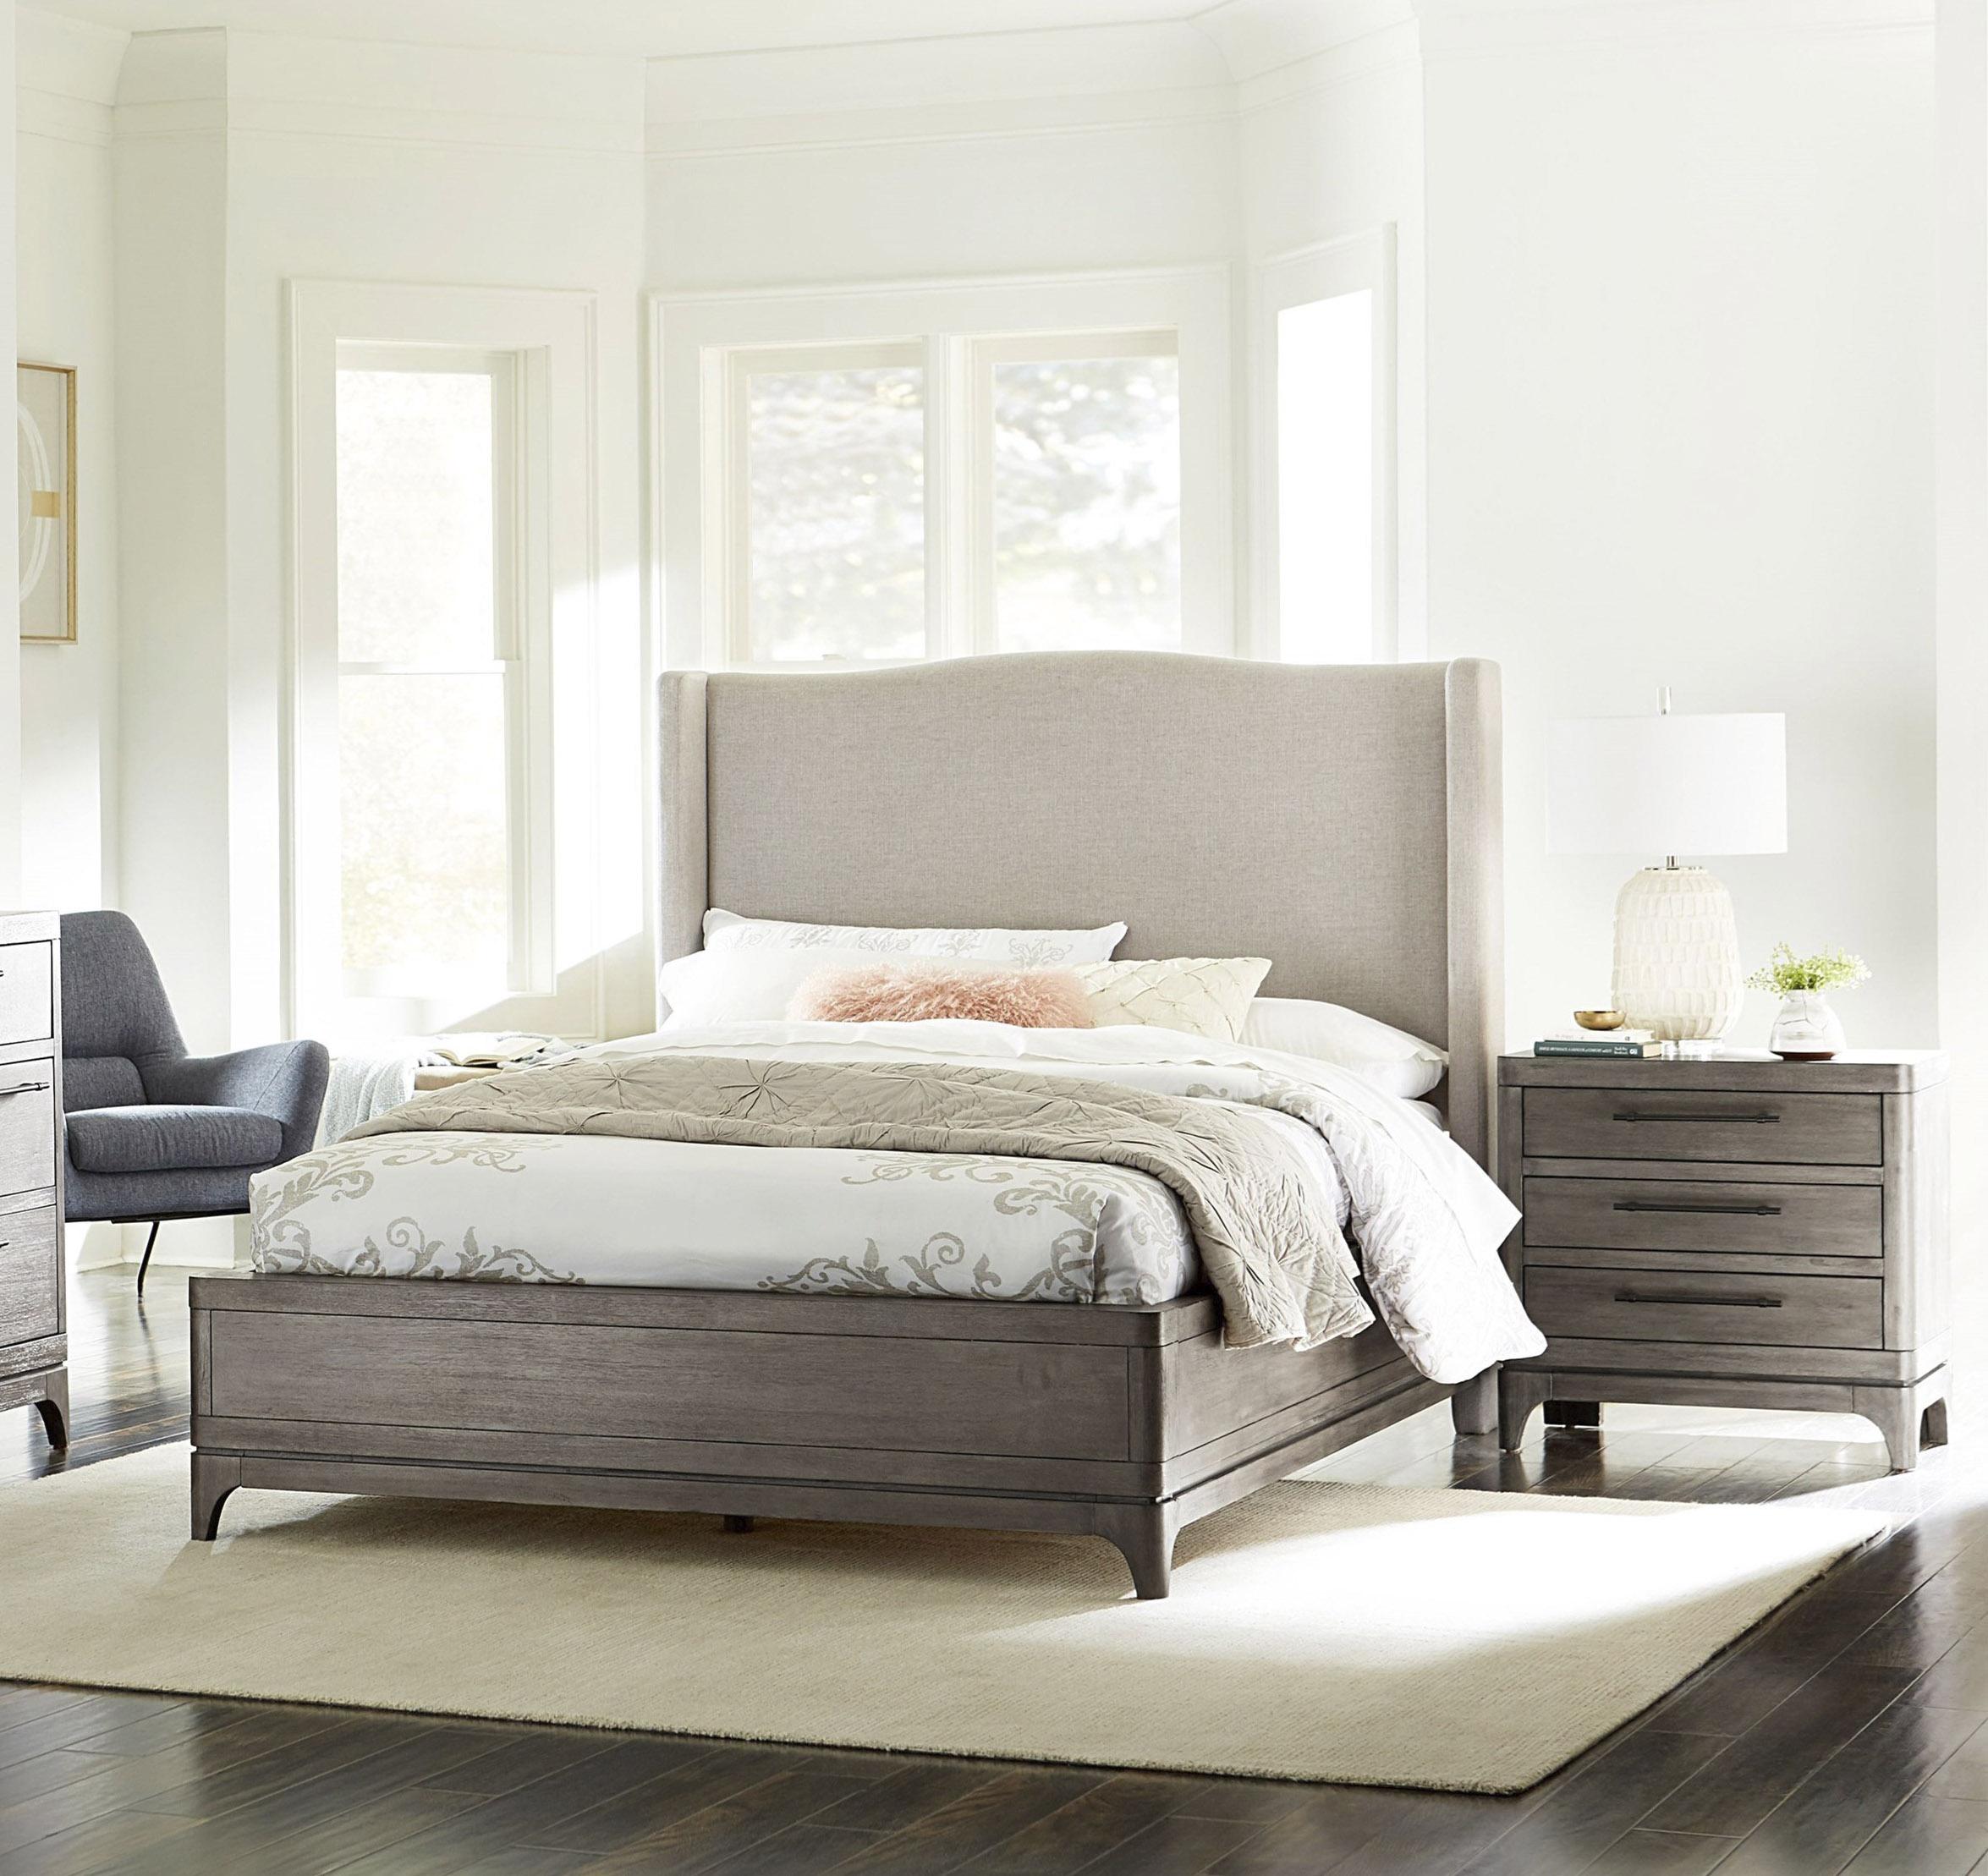 

    
Rustic Slate Gray Upholstered Queen Bedroom Set 3Pcs CICERO by Modus Furniture
